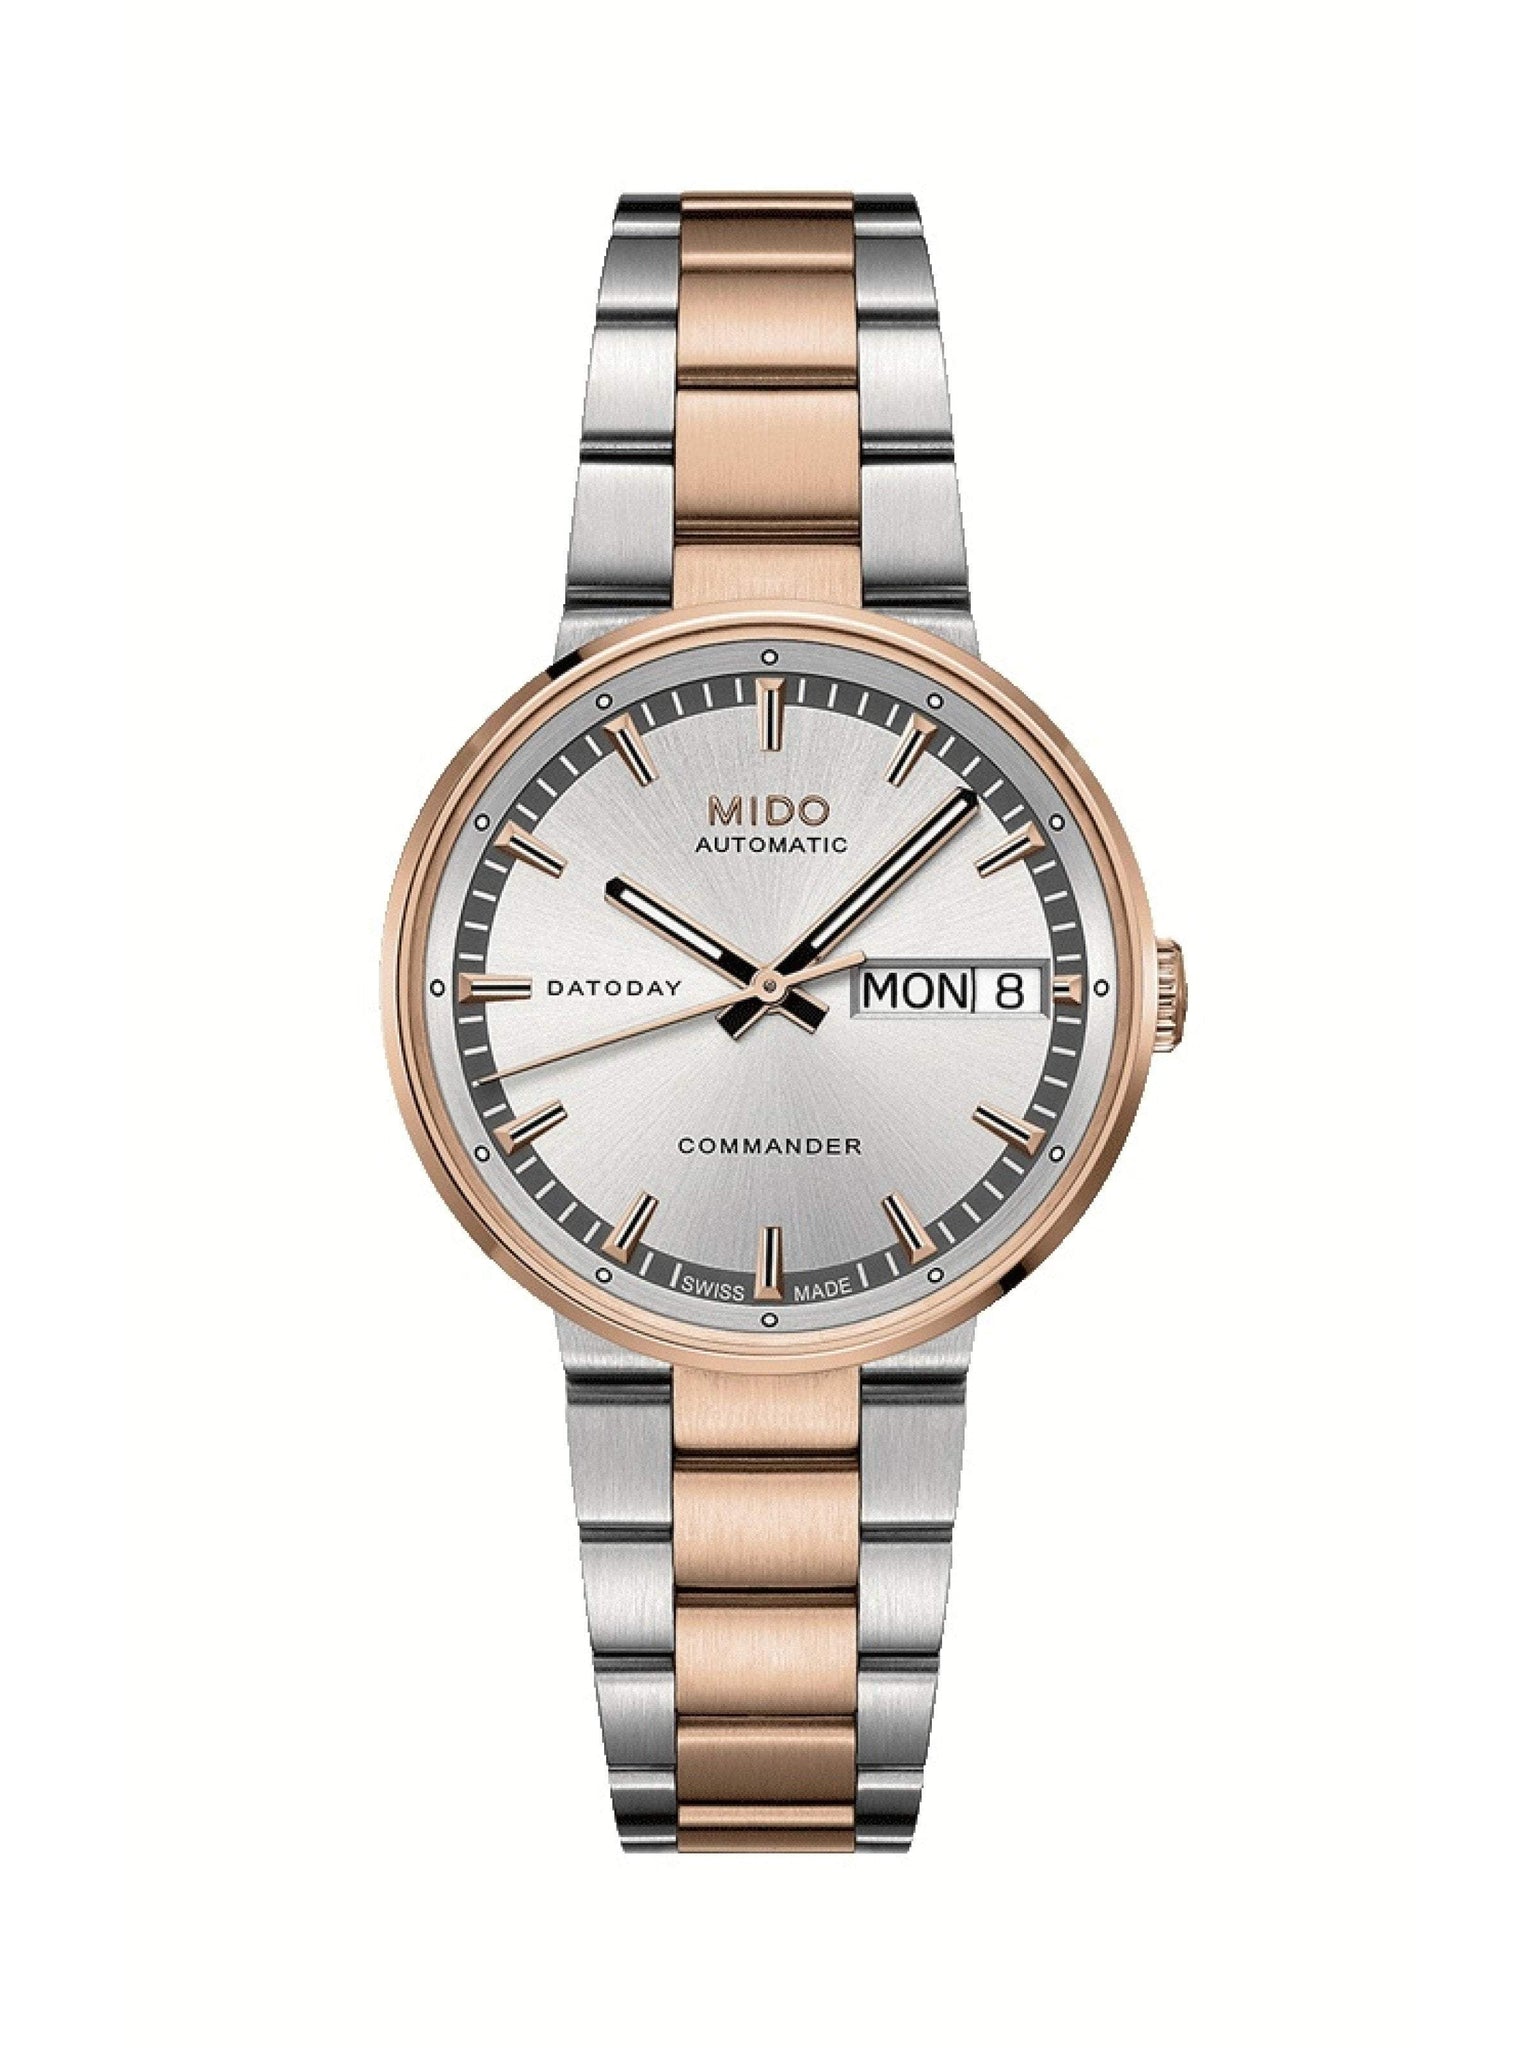 MIDO COMMANDER II SILVER ROSE GOLD AUTOMATIC ANALOG MEN'S WATCH  M014.430.22.031.00